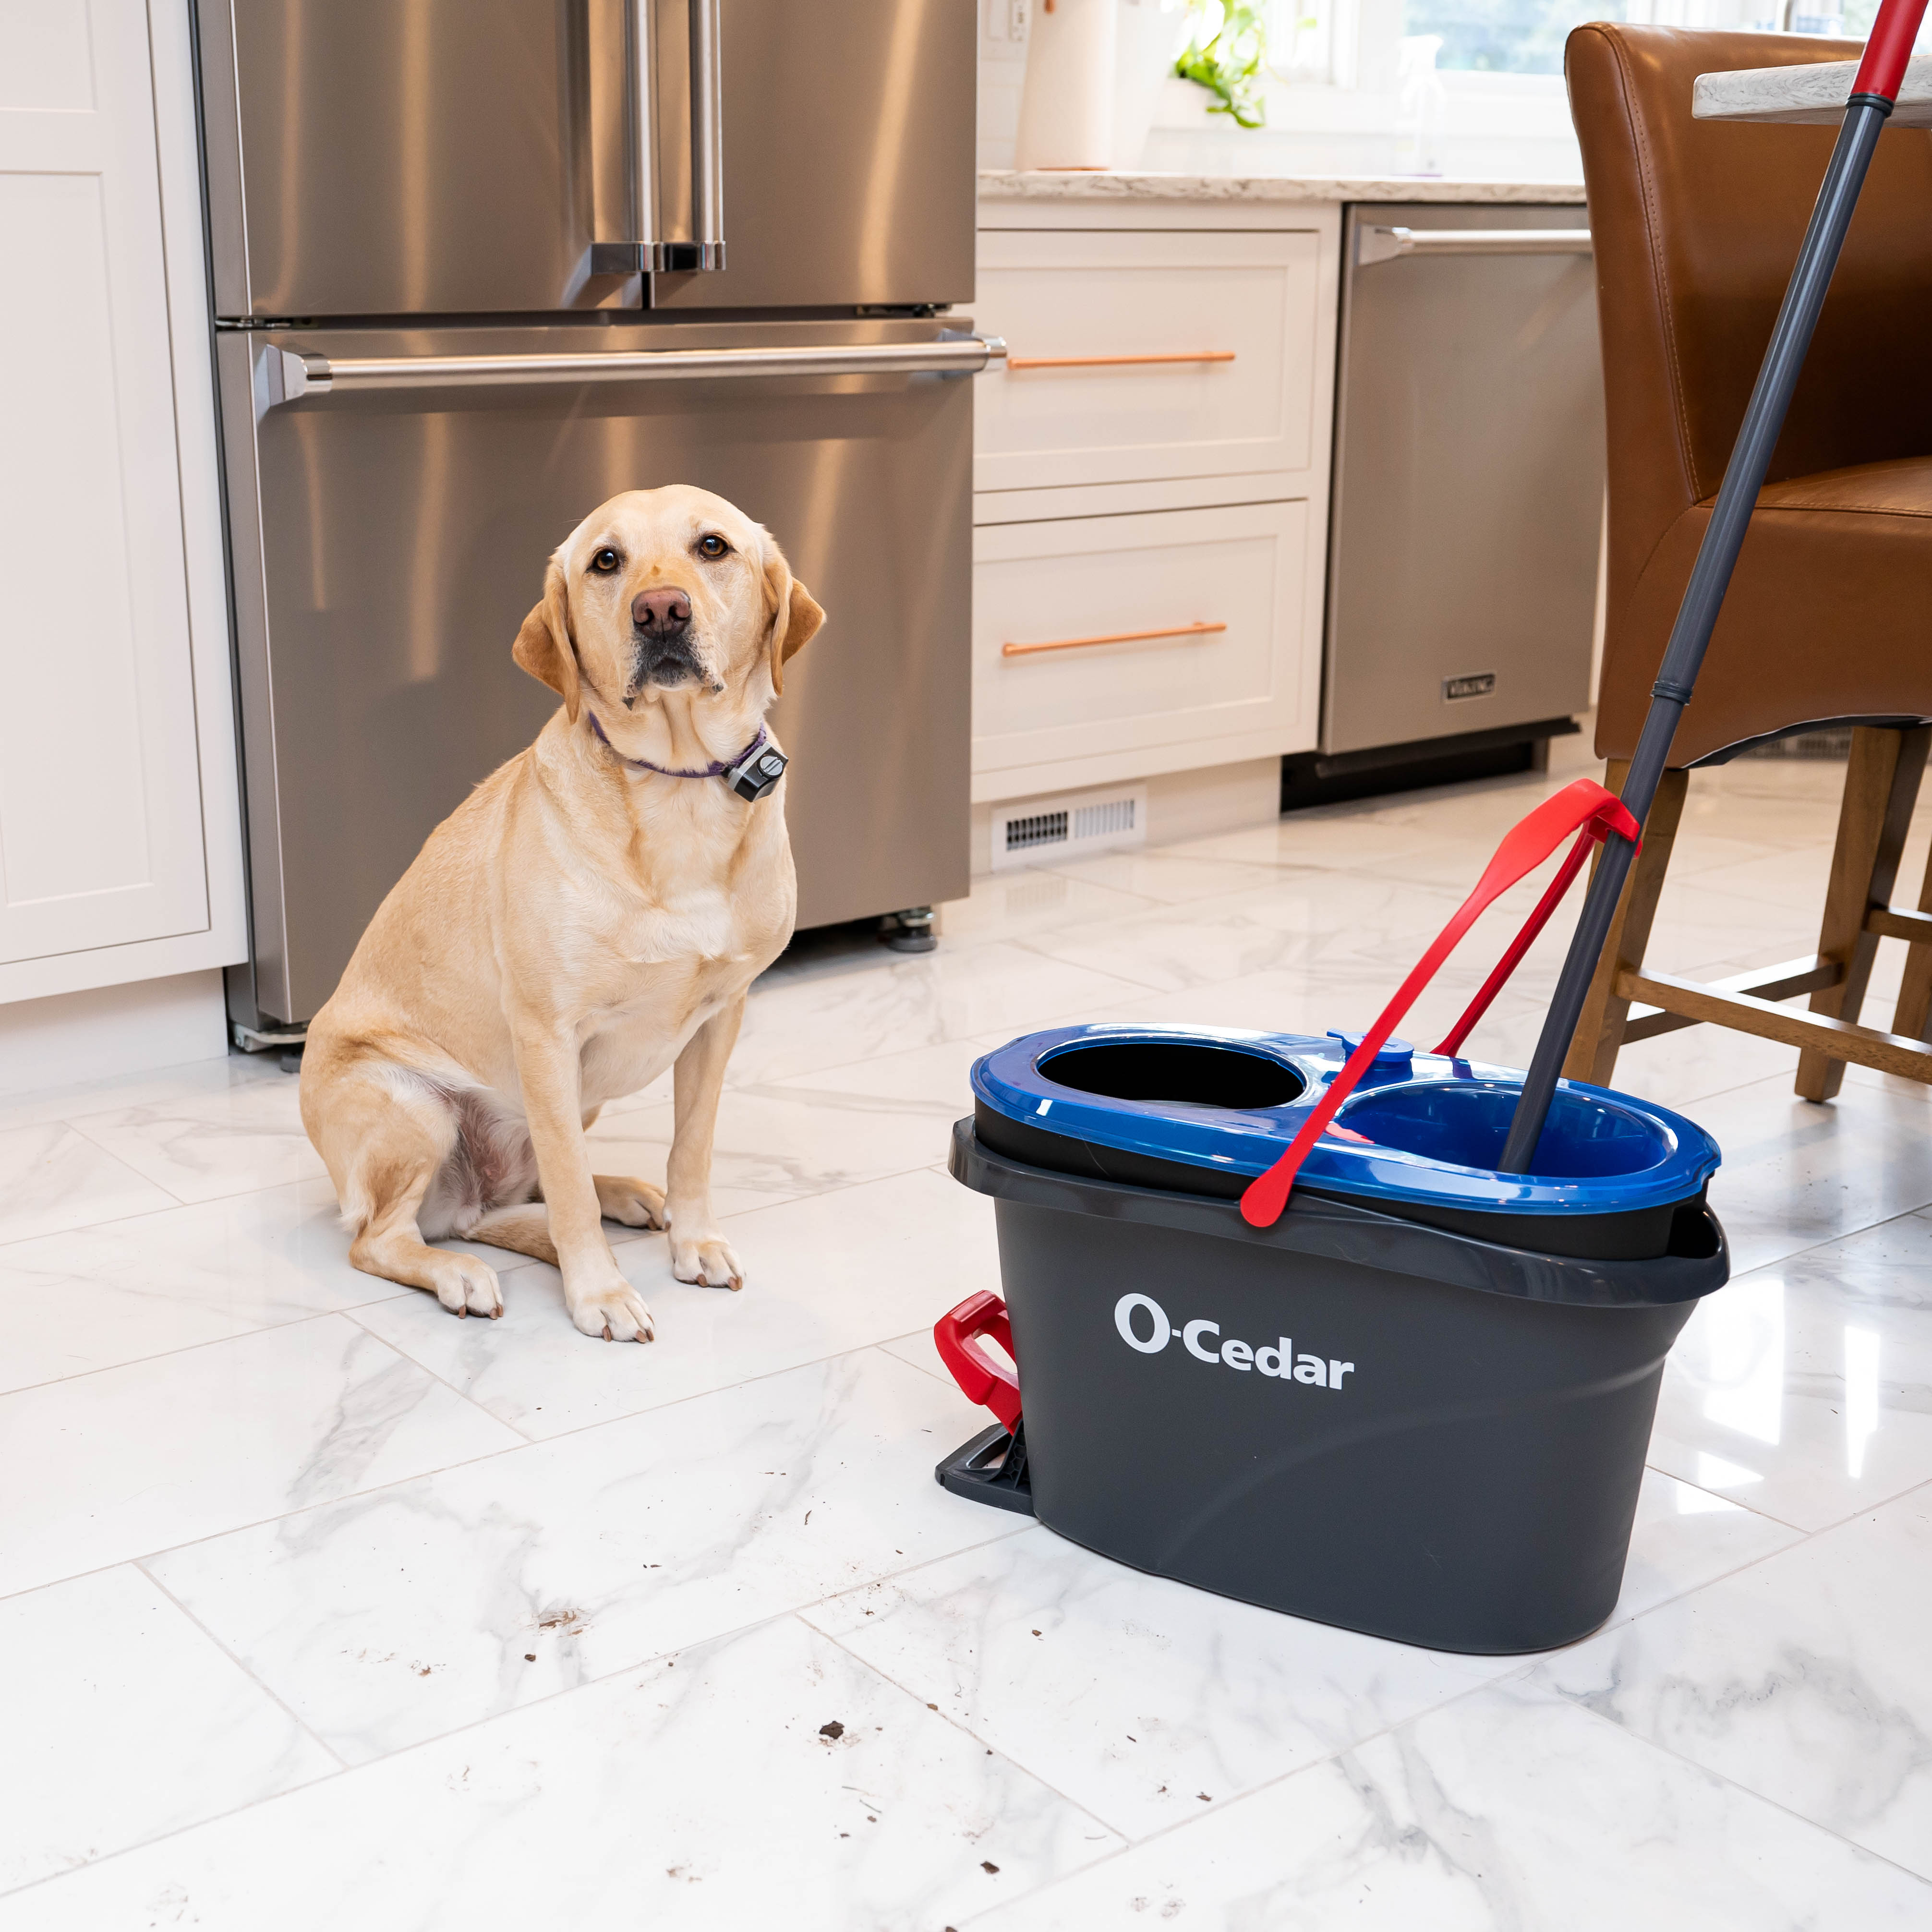 O-Cedar EasyWring RinseClean Spin Mop and Bucket System, Hands-Free System - image 15 of 25